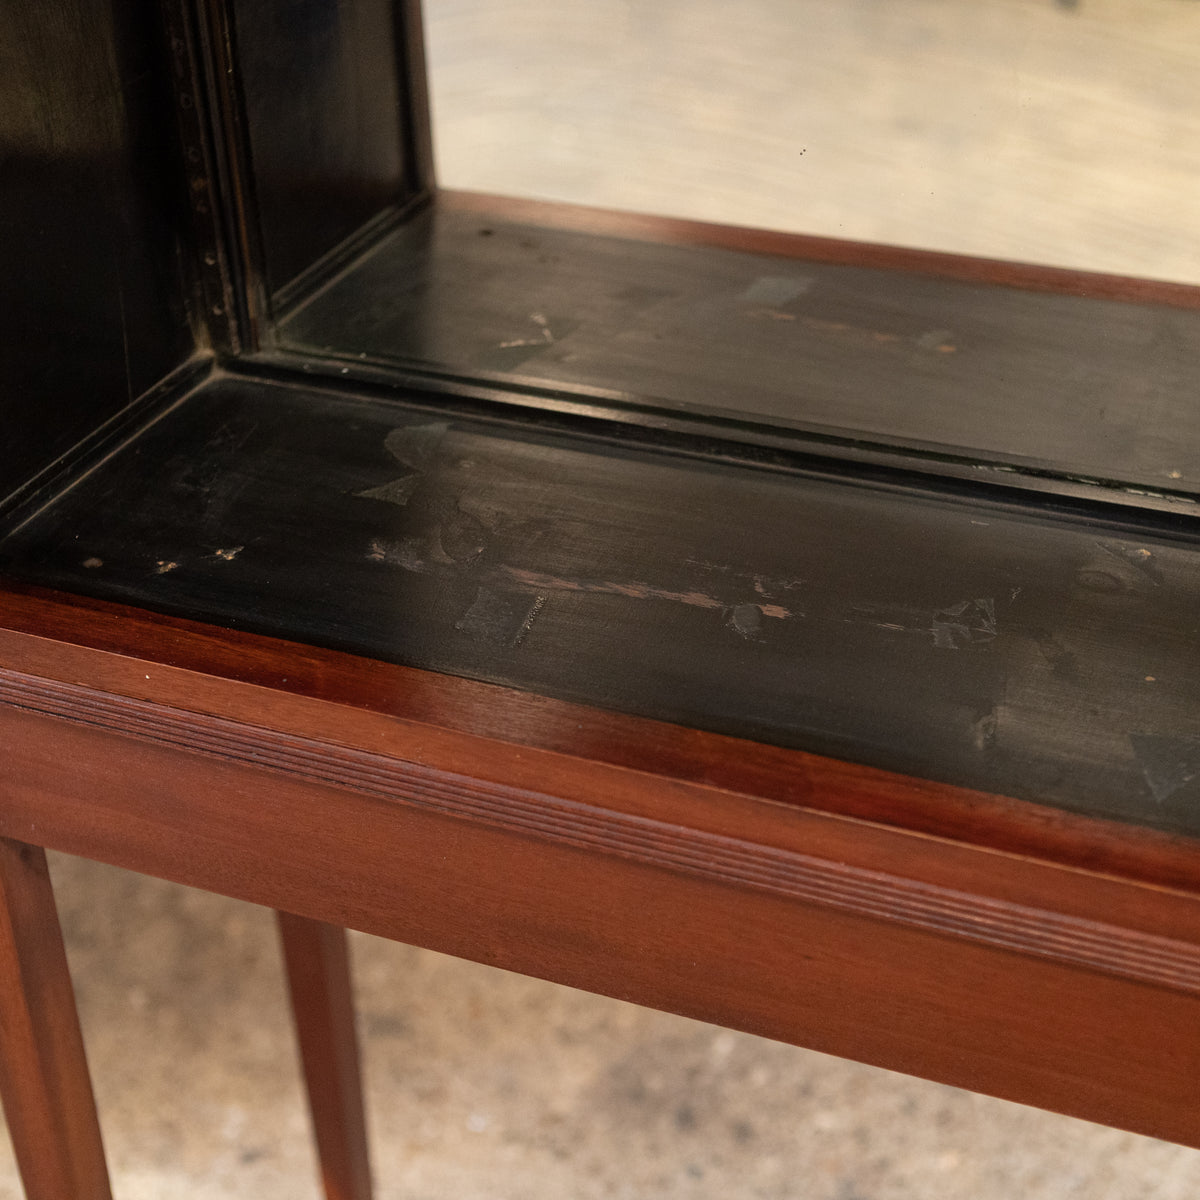 Pair of Antique Curved Glass Counter Display Cases on Legs | The Architectural Forum